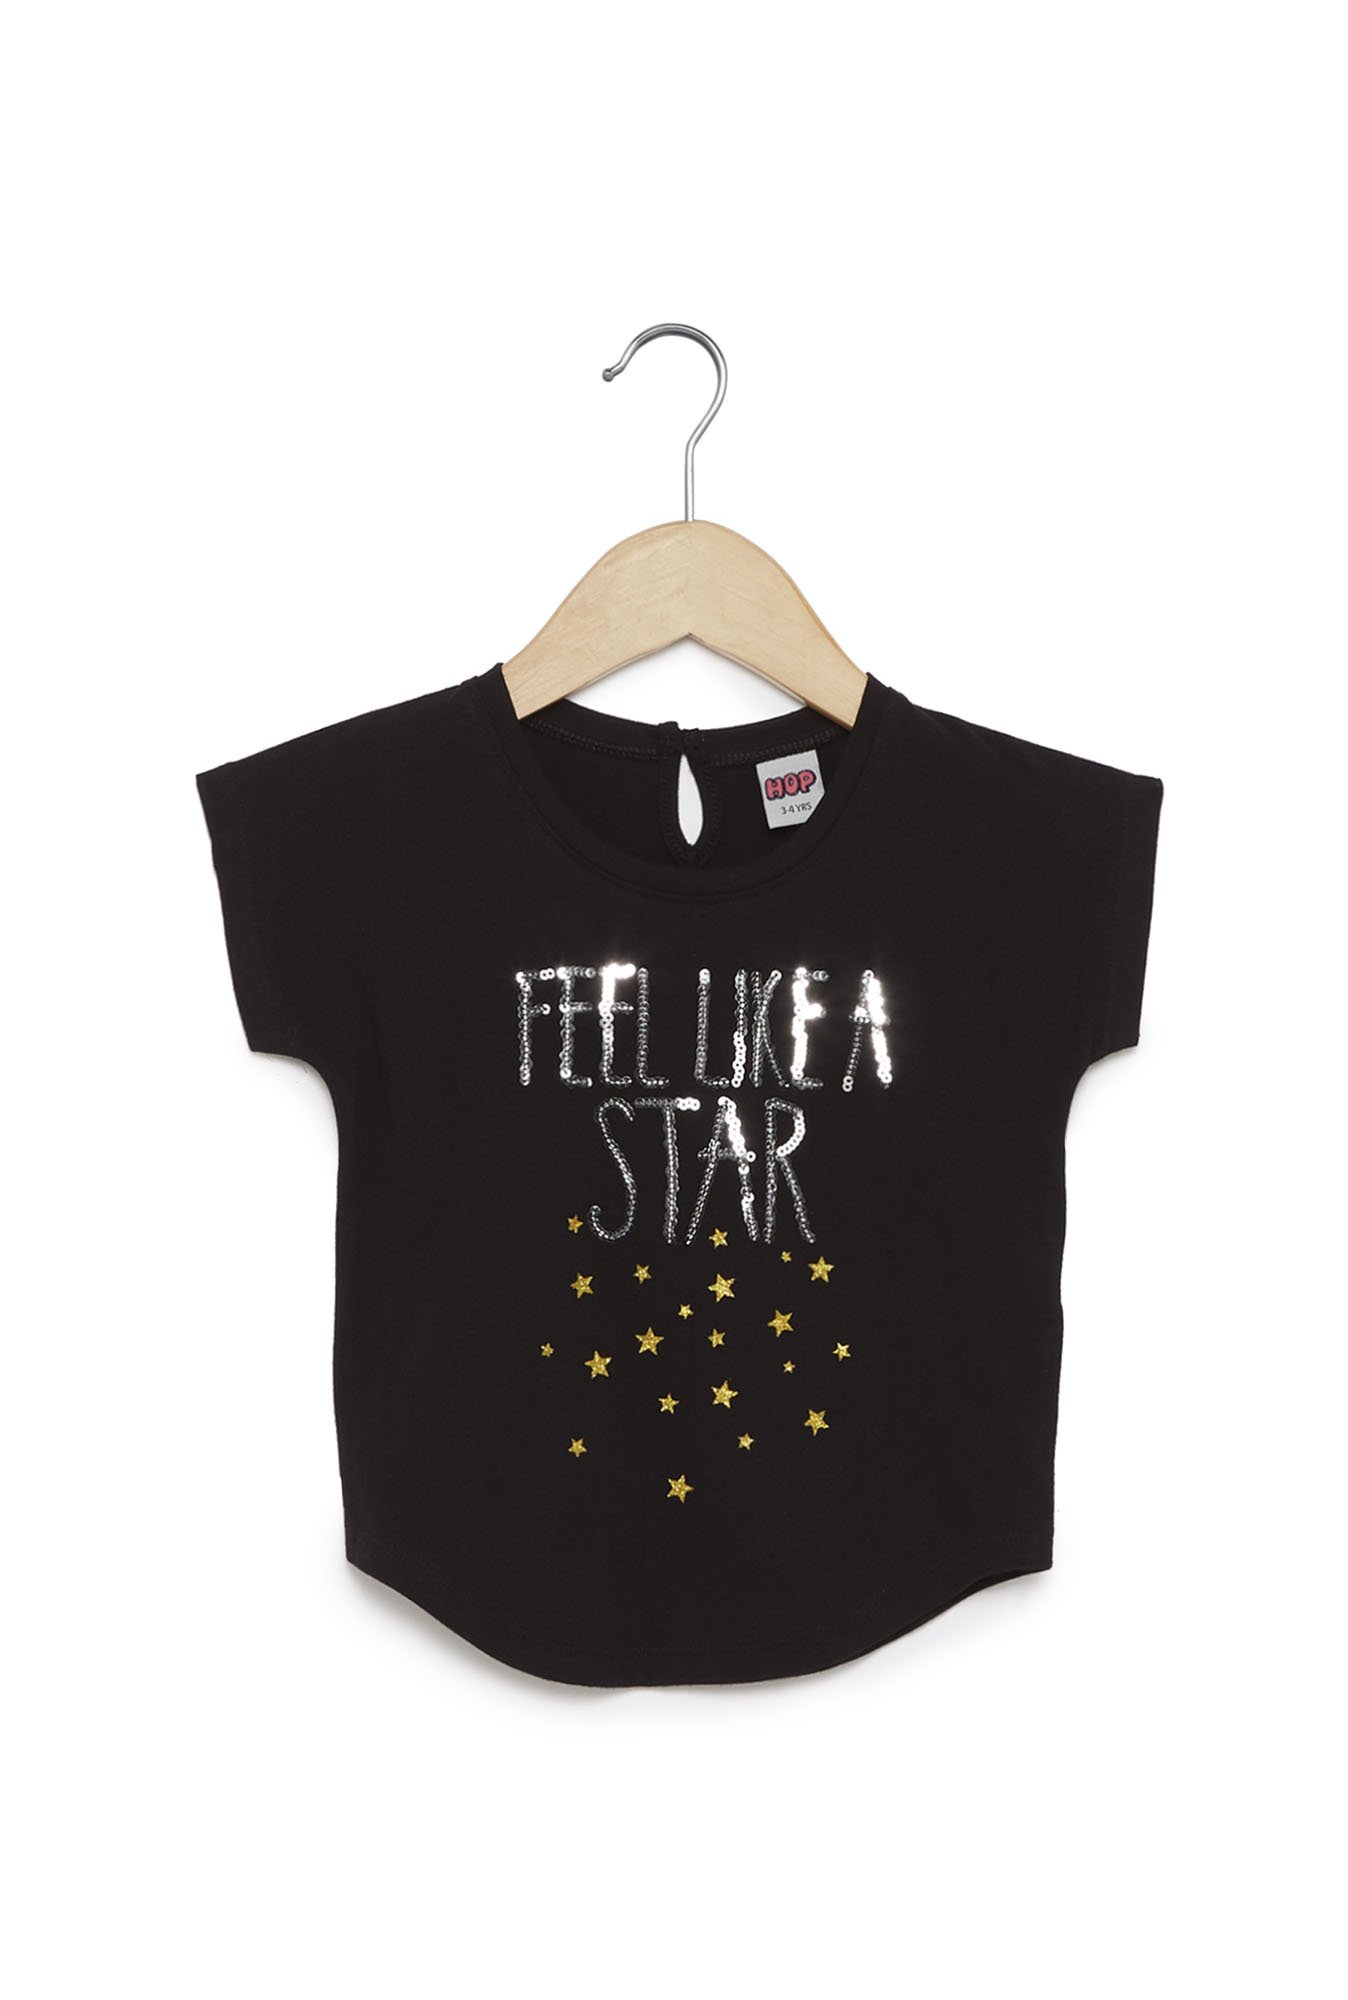 Tata Cliq Offers-  Get kids Casual Tops & Tees Starting at Rs. 399 